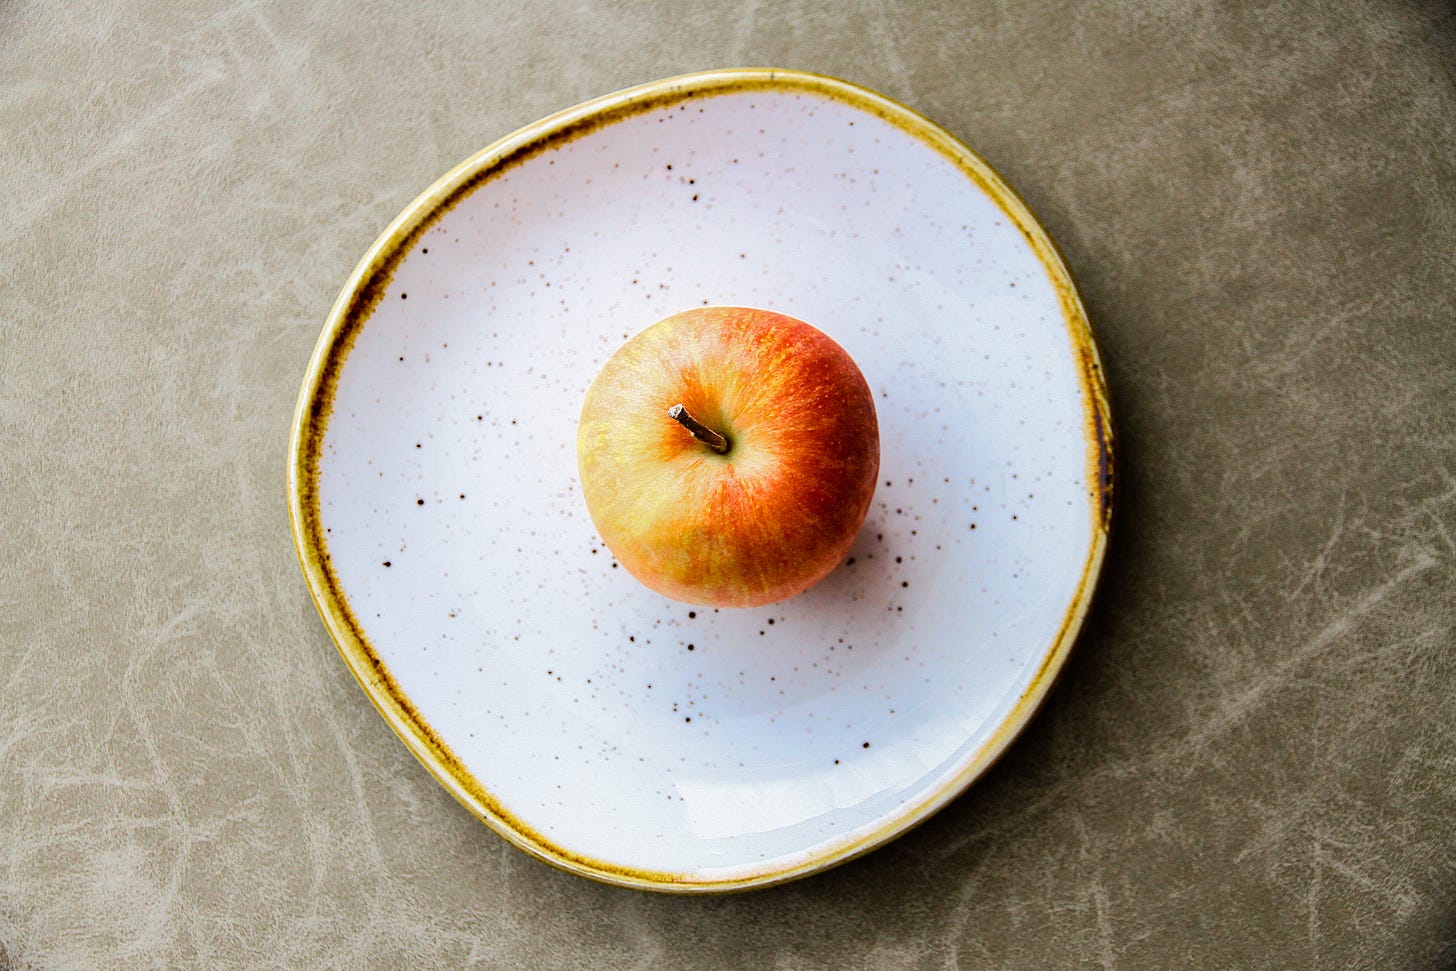 View from above of a red apple on a white plate with a gold rim.